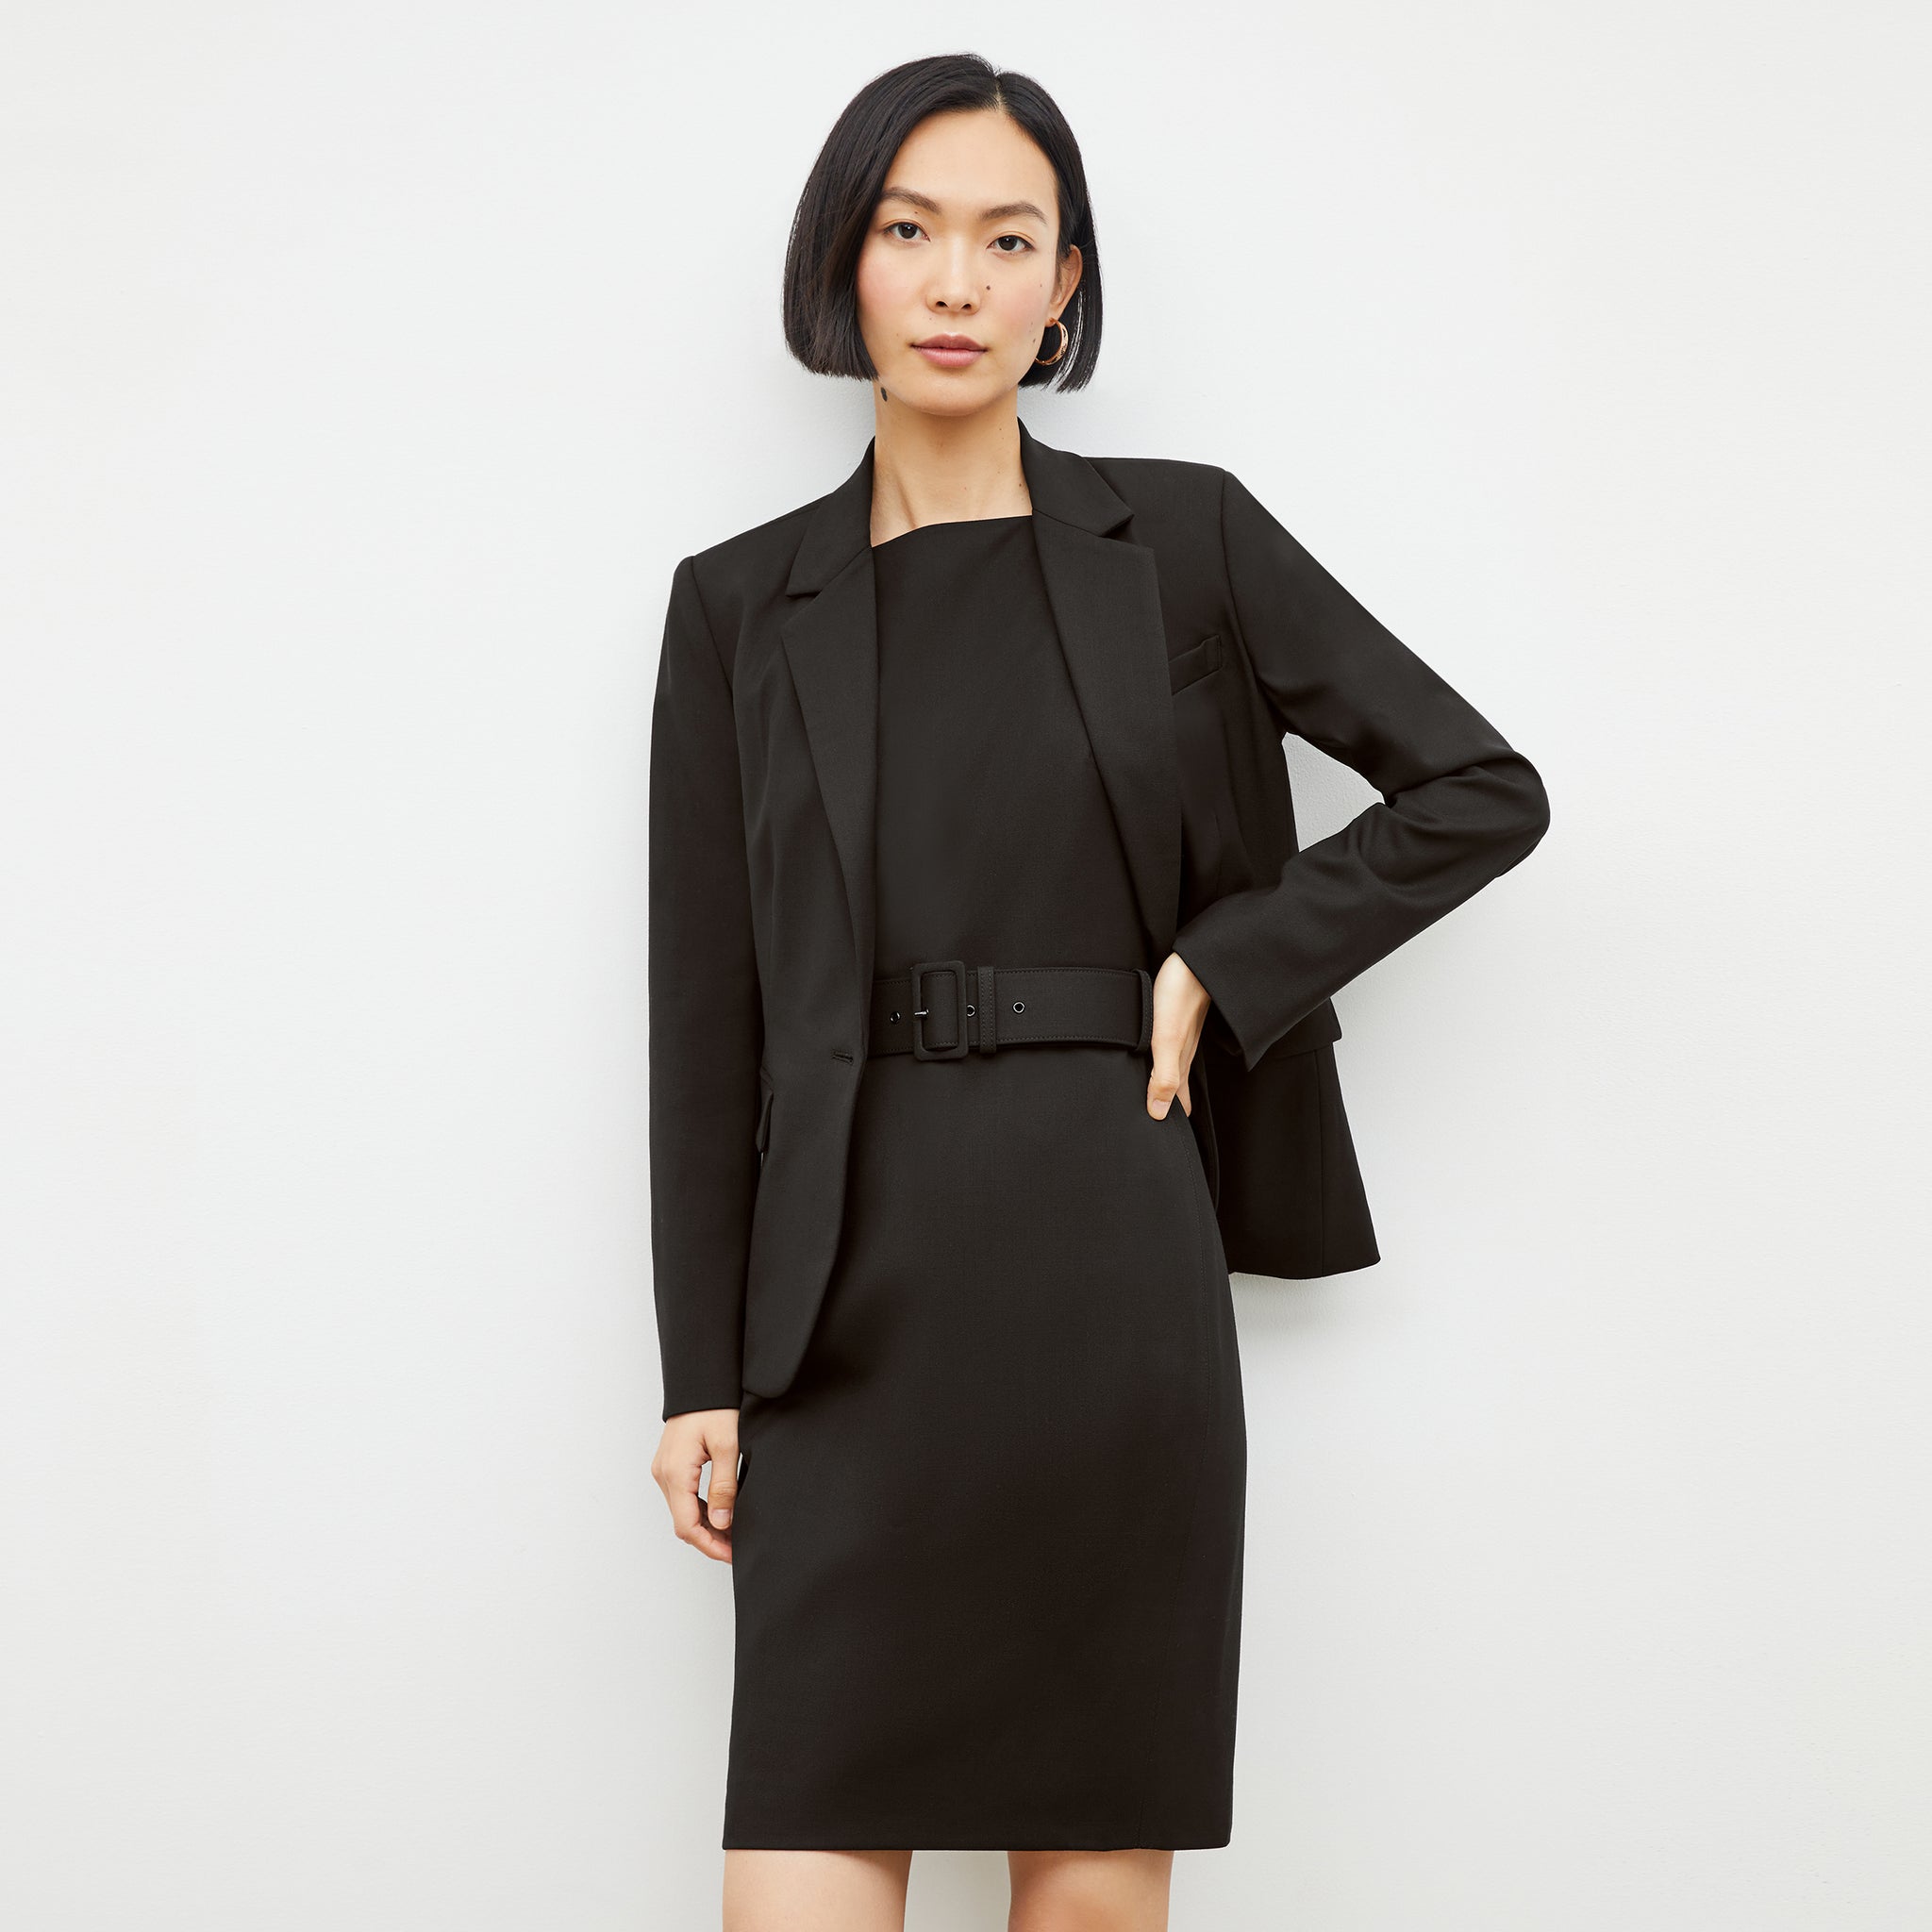 image of a woman wearing the cynthia dress in black